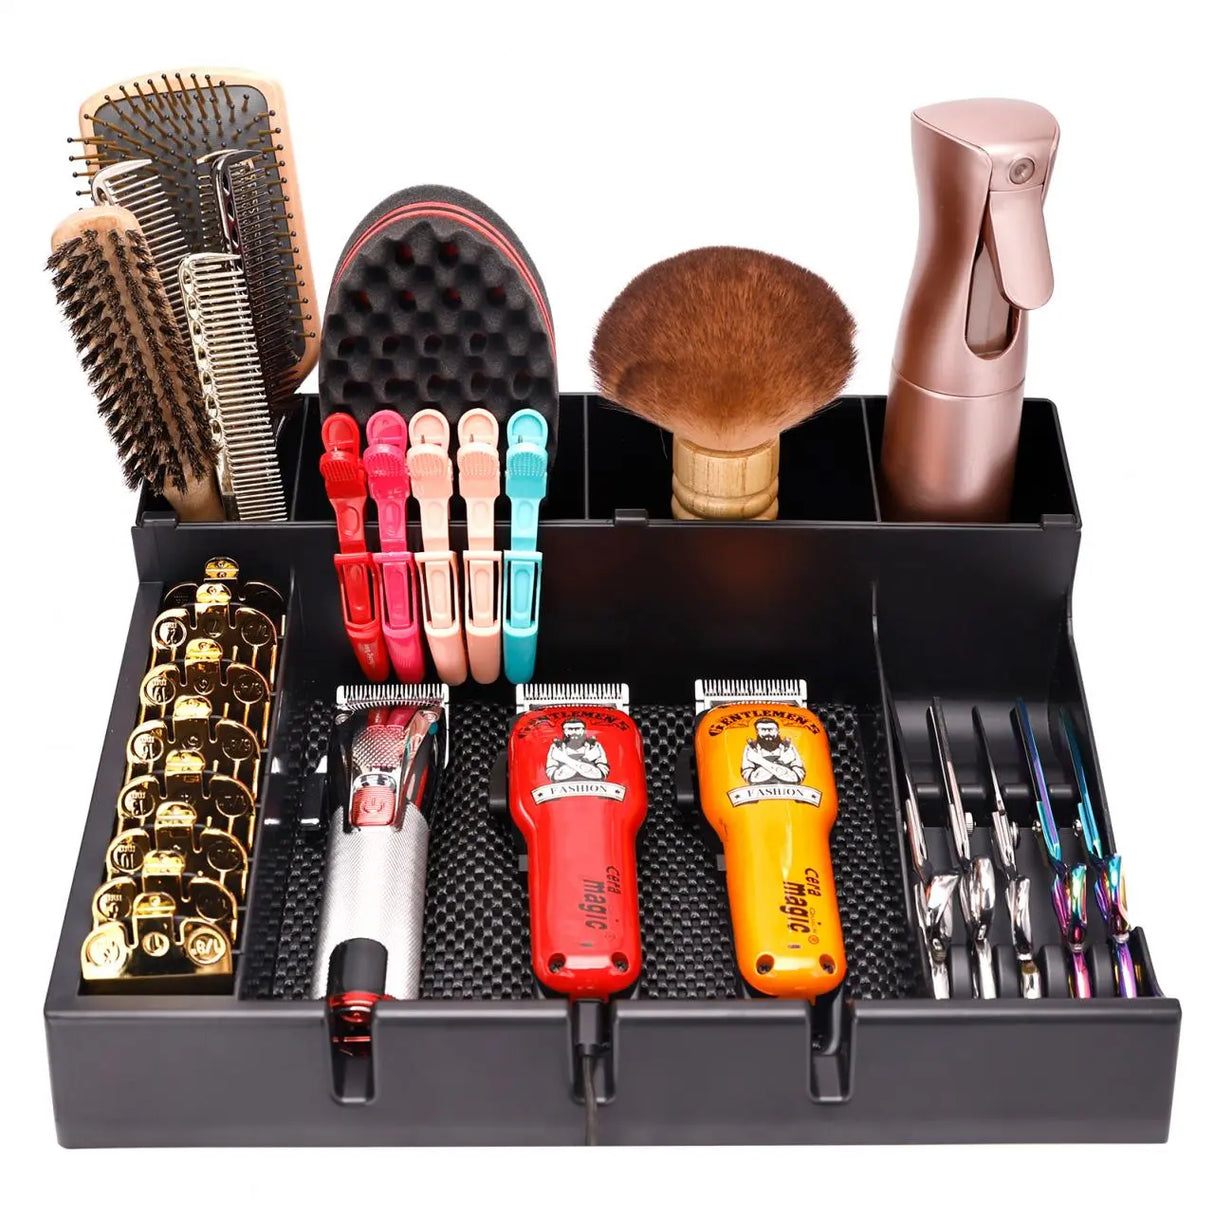 Multi-Purpose All in One Barber Tool Tray - Barber Tools